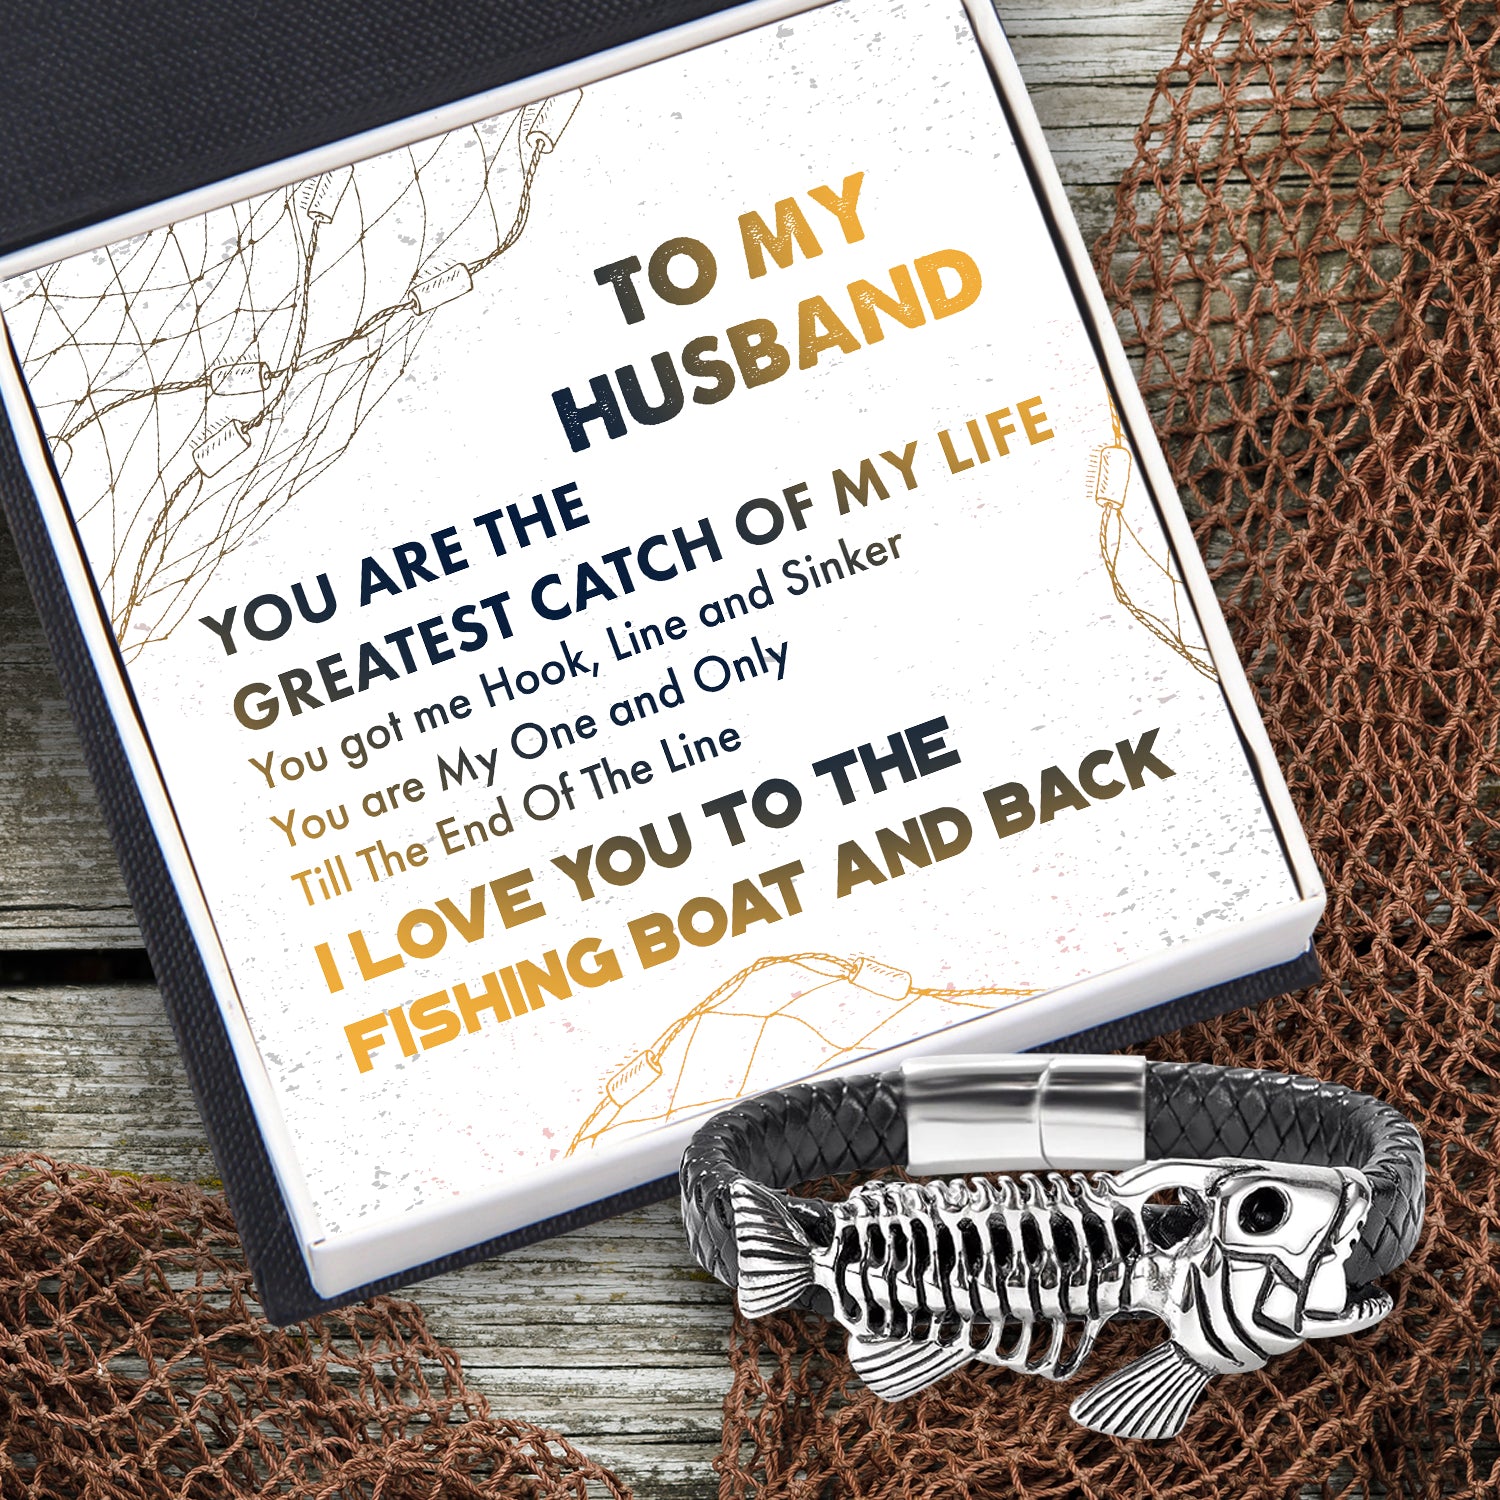 Black Leather Bracelet Fish Bone - Fishing - To My Husband - You Are My One and Only - Ukgbzr14001